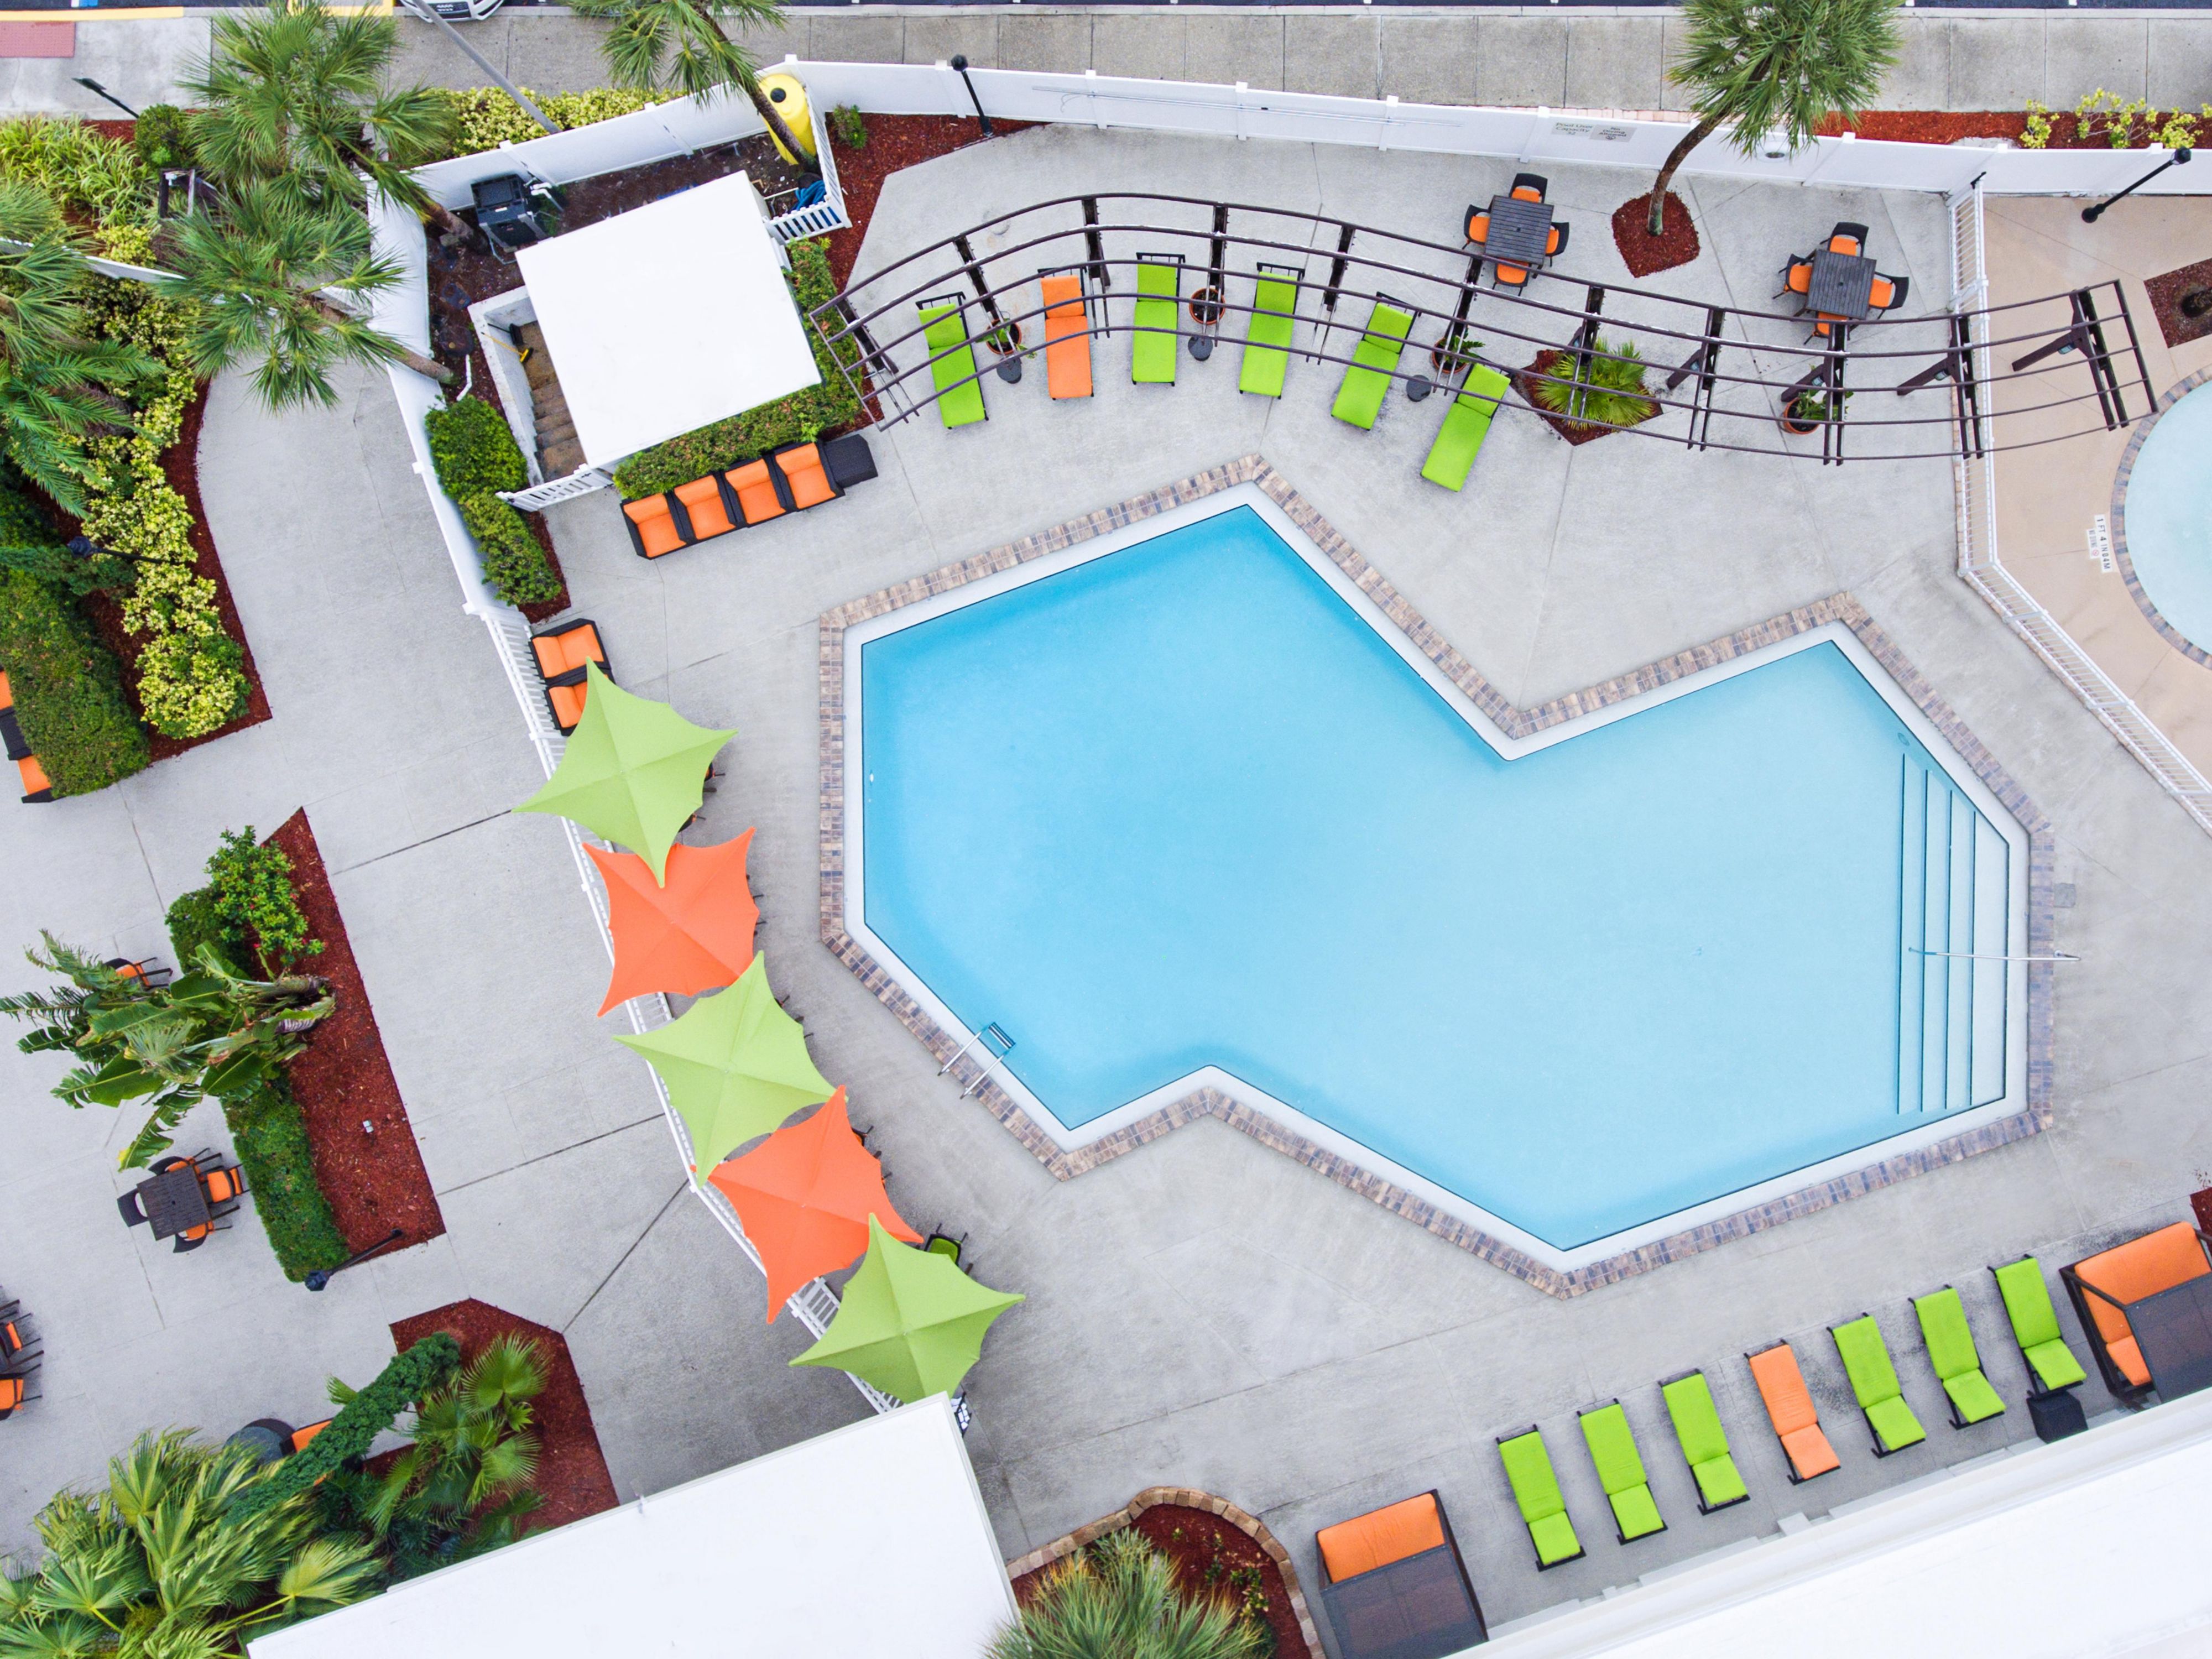 Make the most of your Orlando stay with our exceptional amenities. Take a refreshing dip in our outdoor sparkling pool or play in the splash zone. Enjoy our 24-hour arcade and fitness center. Relish the perk of our Kids Eat Free offer. 